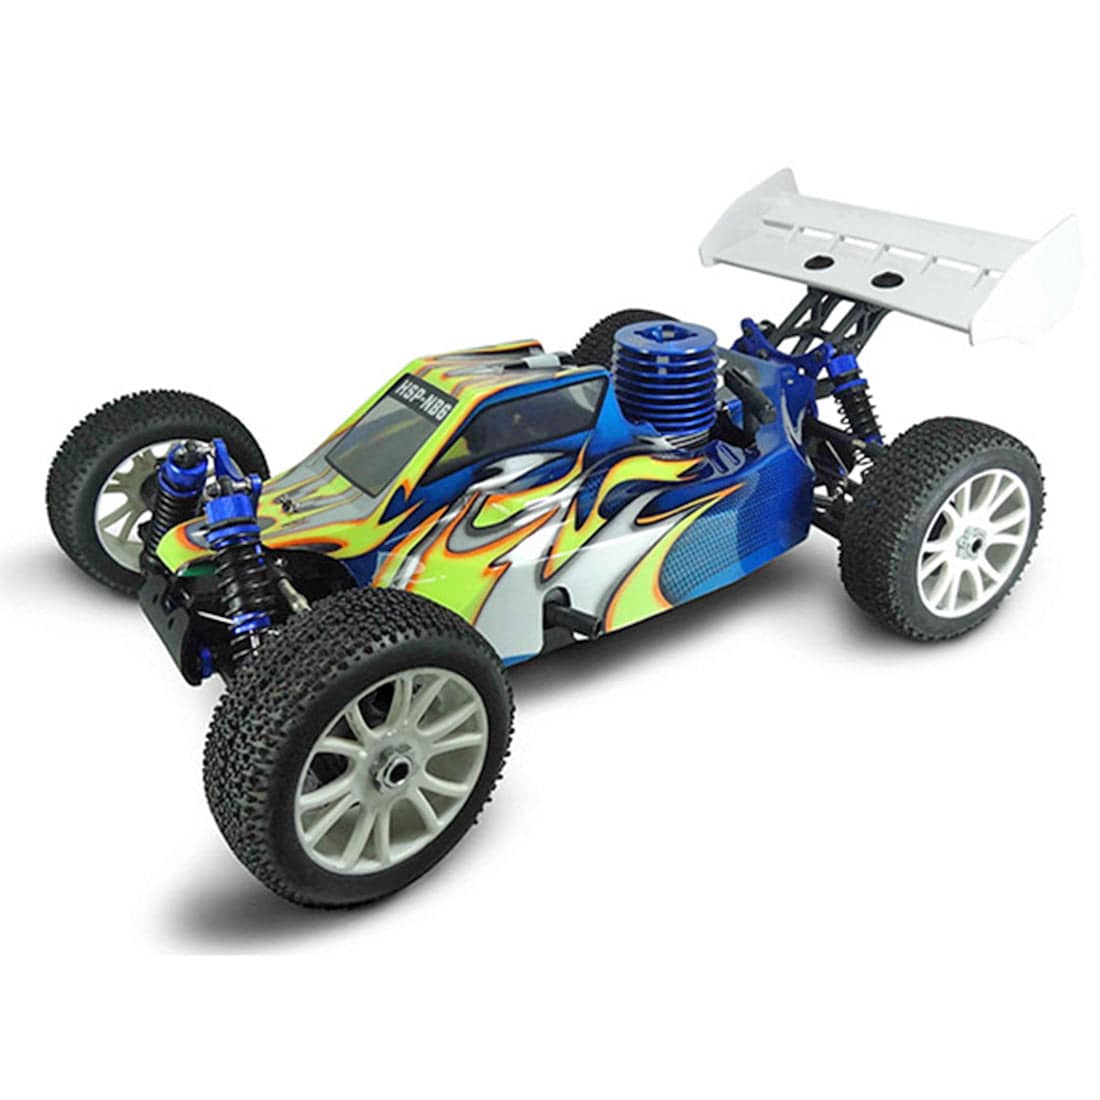 HSP 94970 2.4Ghz 4WD Gas Powered Car Off-road Vehicle Model RTR with 26CXP Nitro Engine 70-80 km/H -